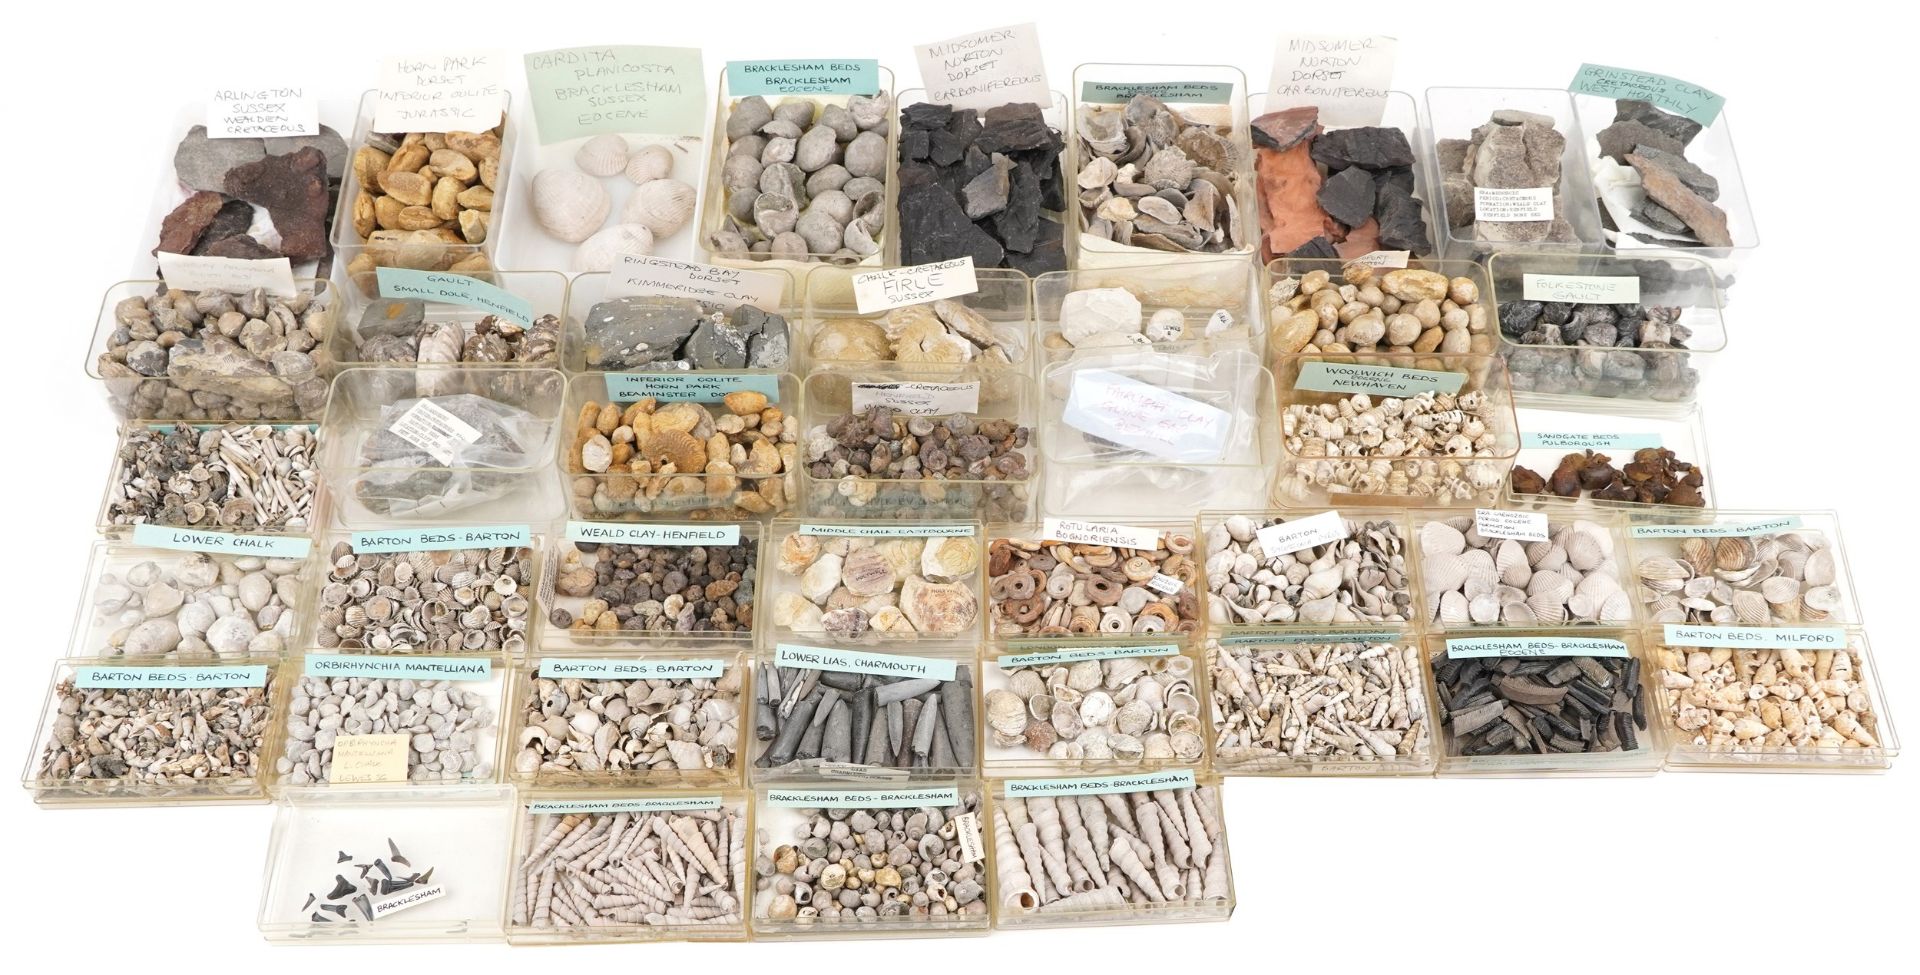 Large collection of Natural history and Geology interest fossils and shells including Orbirhynchia